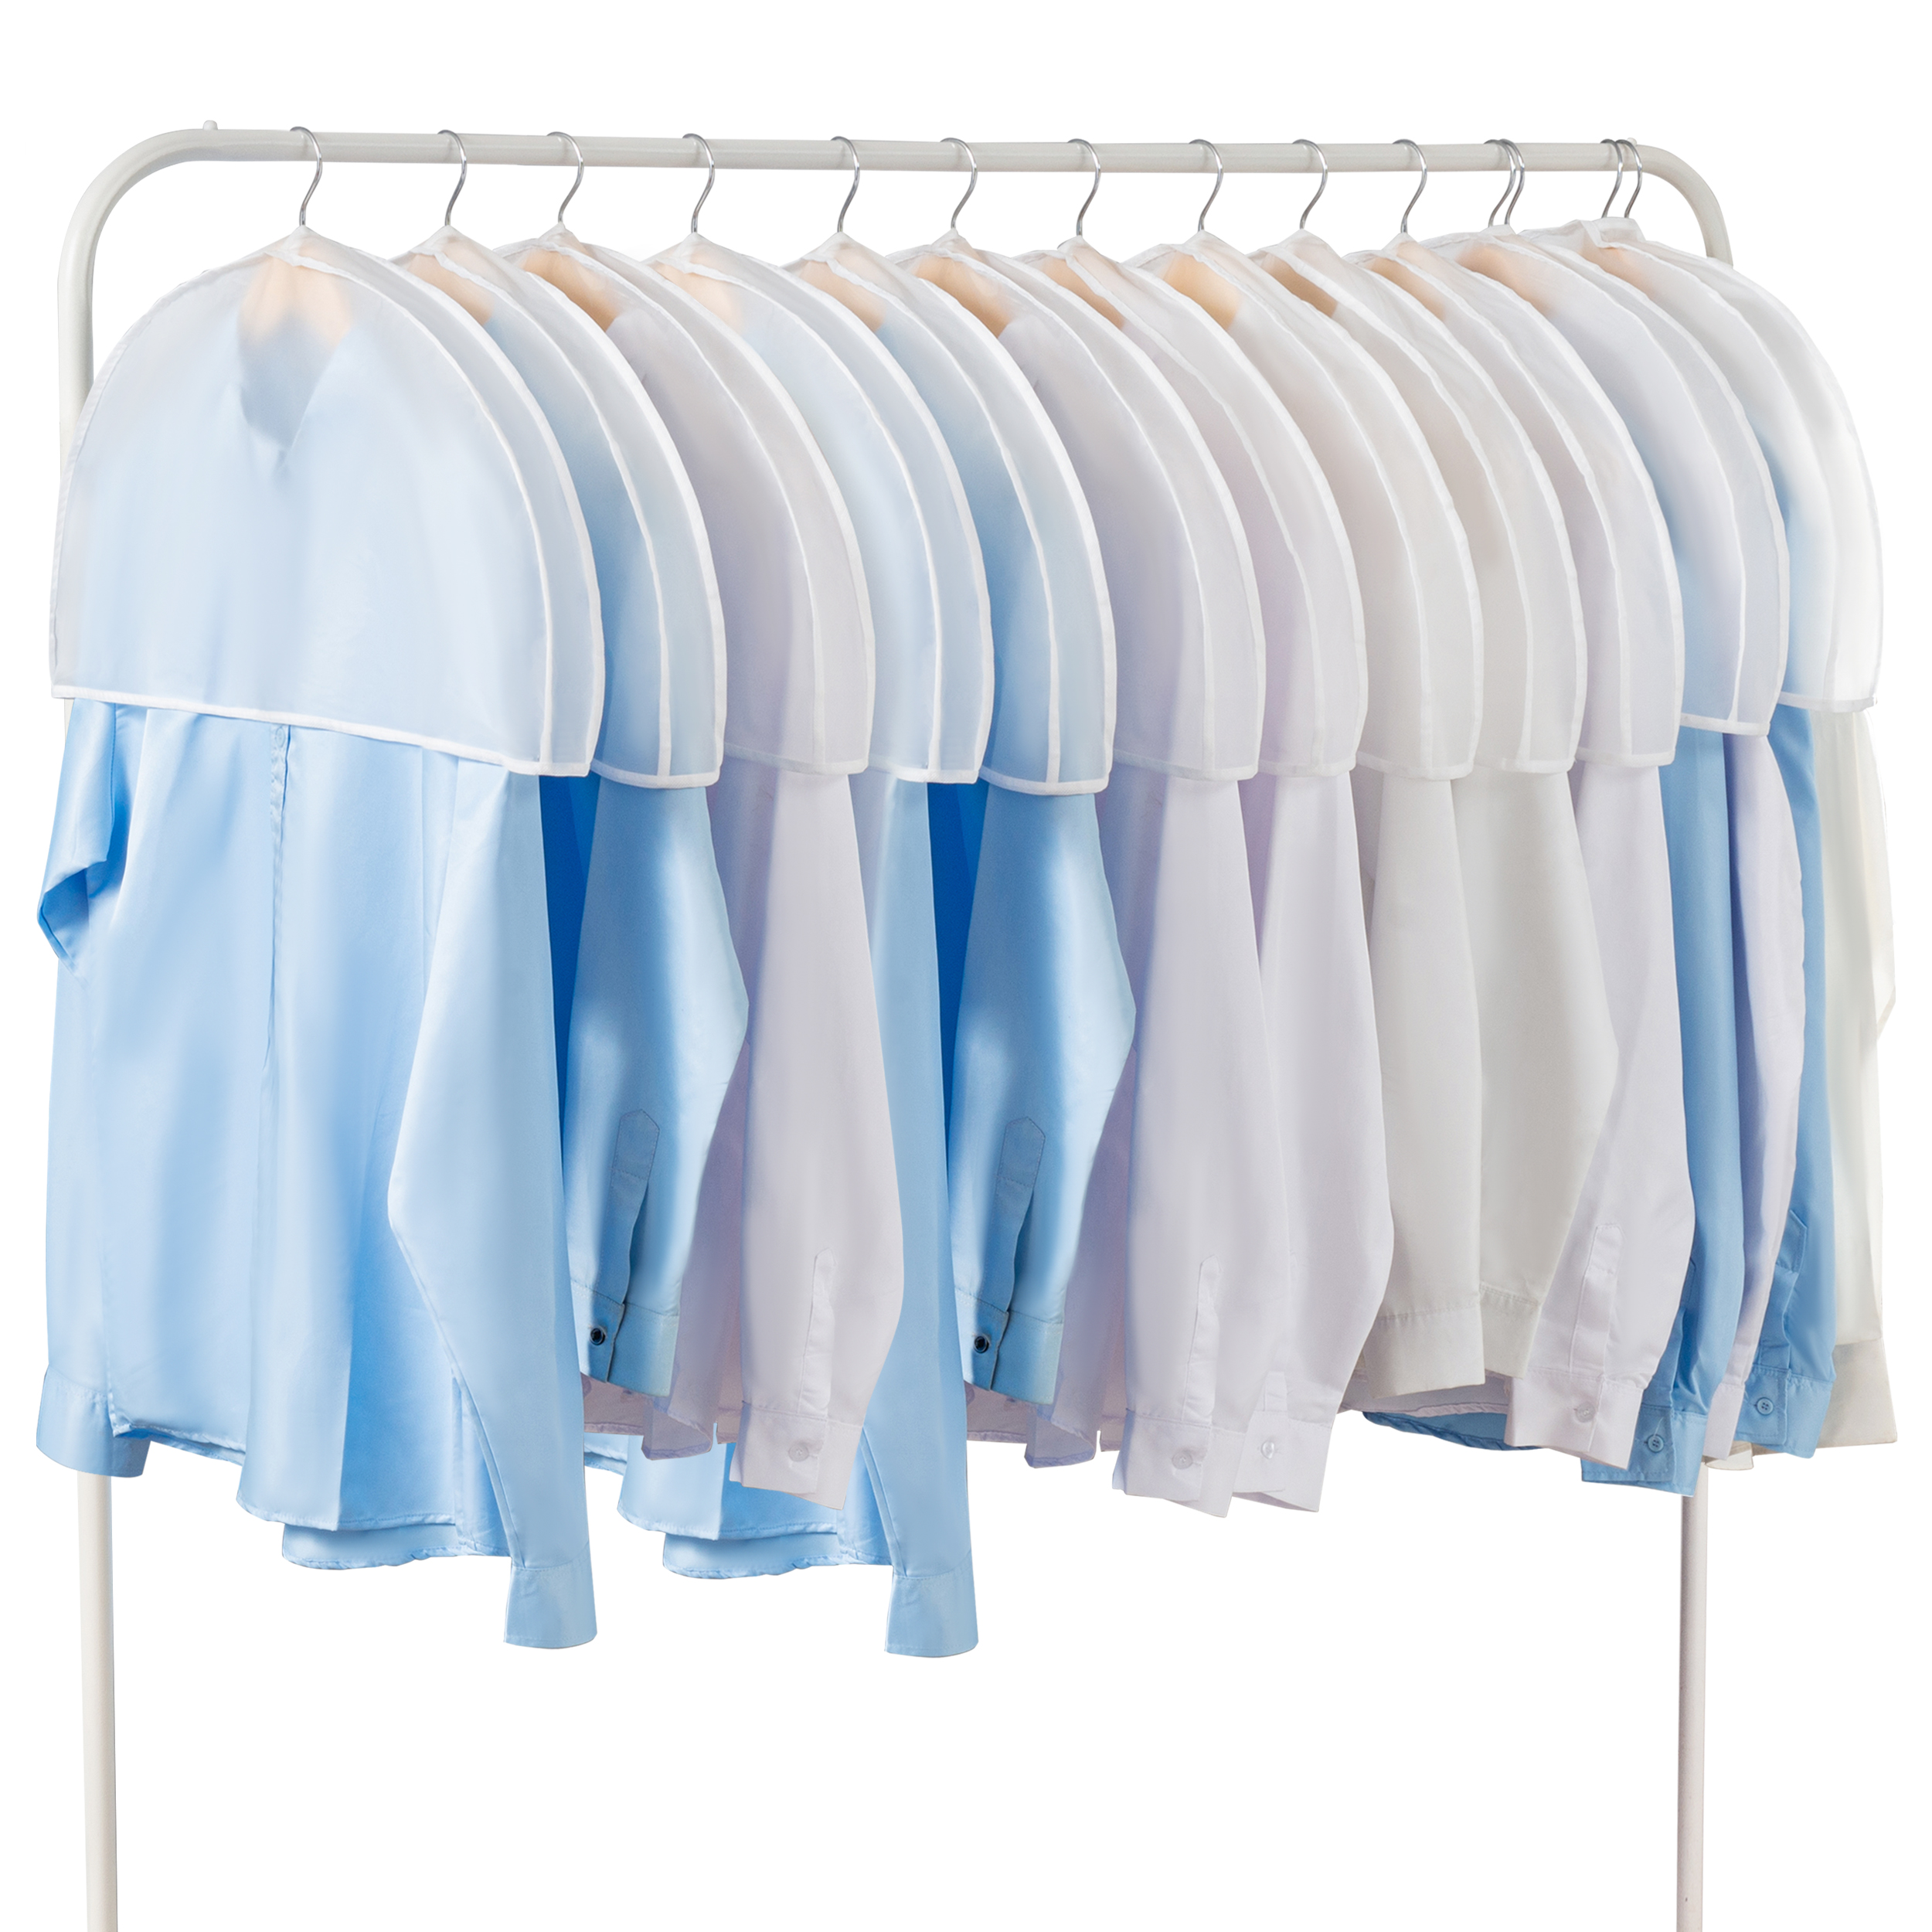 

Shoulder Covers Plastic For Clothes (set Of 12) Closet Clothes Protectors Breathable Clear Jacket Cover With 2" Gusset For Suit, Coat, Jackets, Blouses, Dress - 24'' X12" X2''/12 Pack